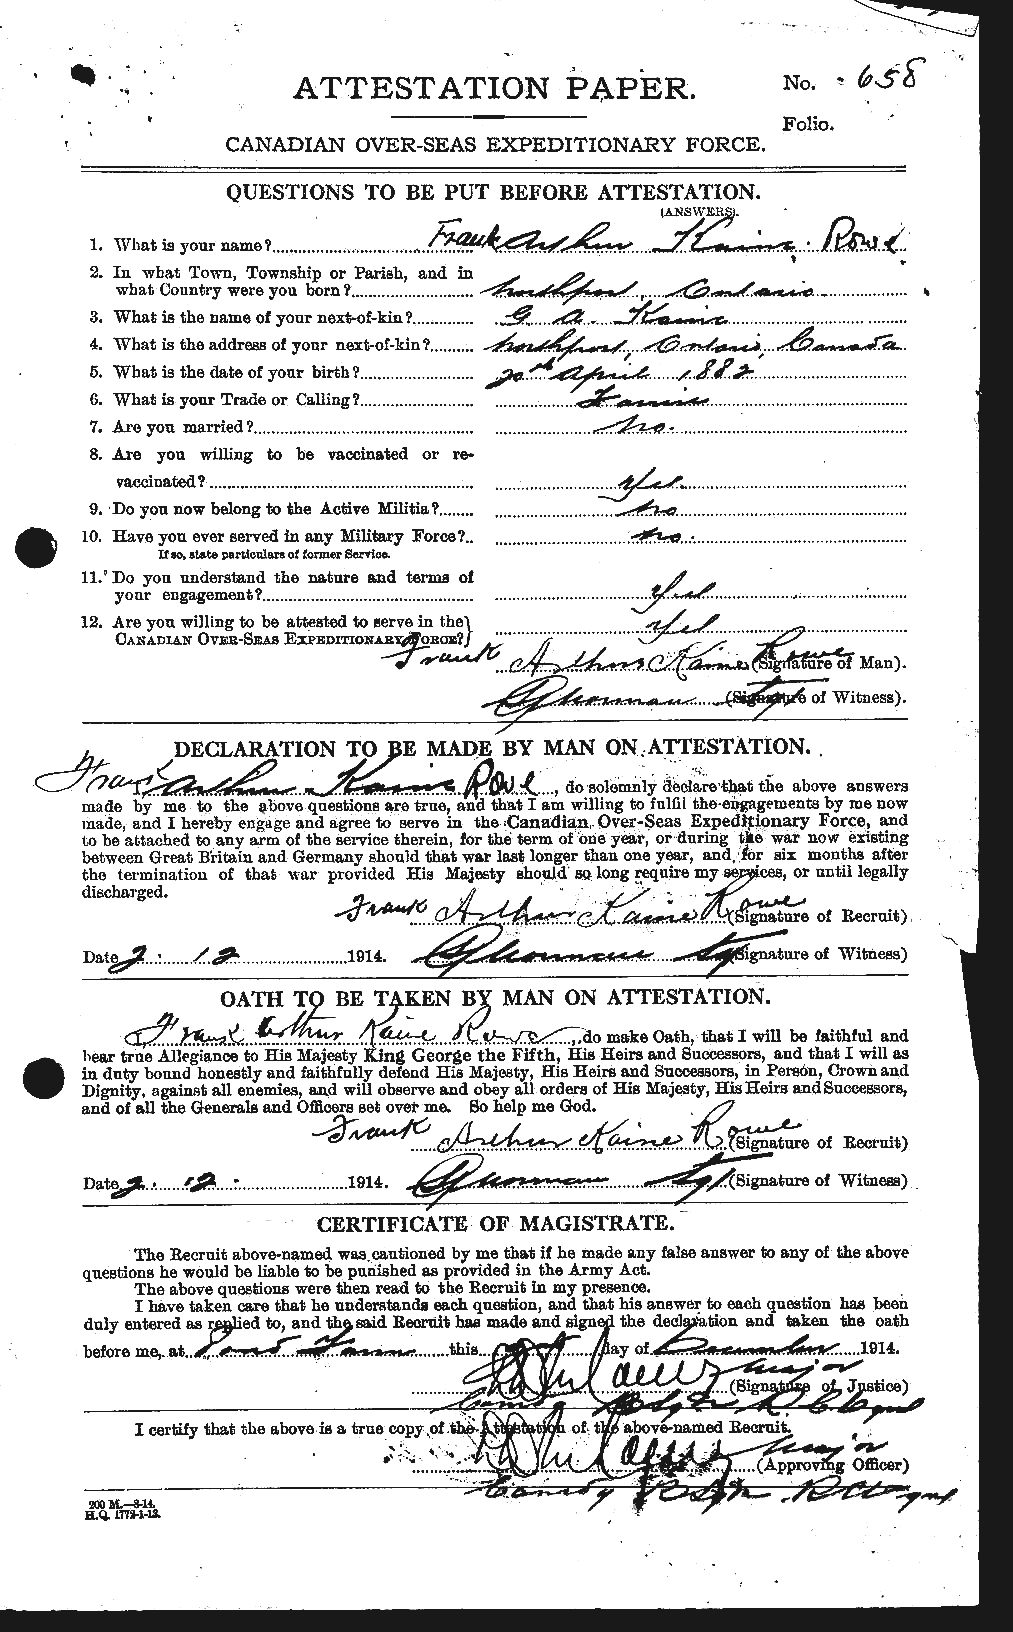 Personnel Records of the First World War - CEF 615854a